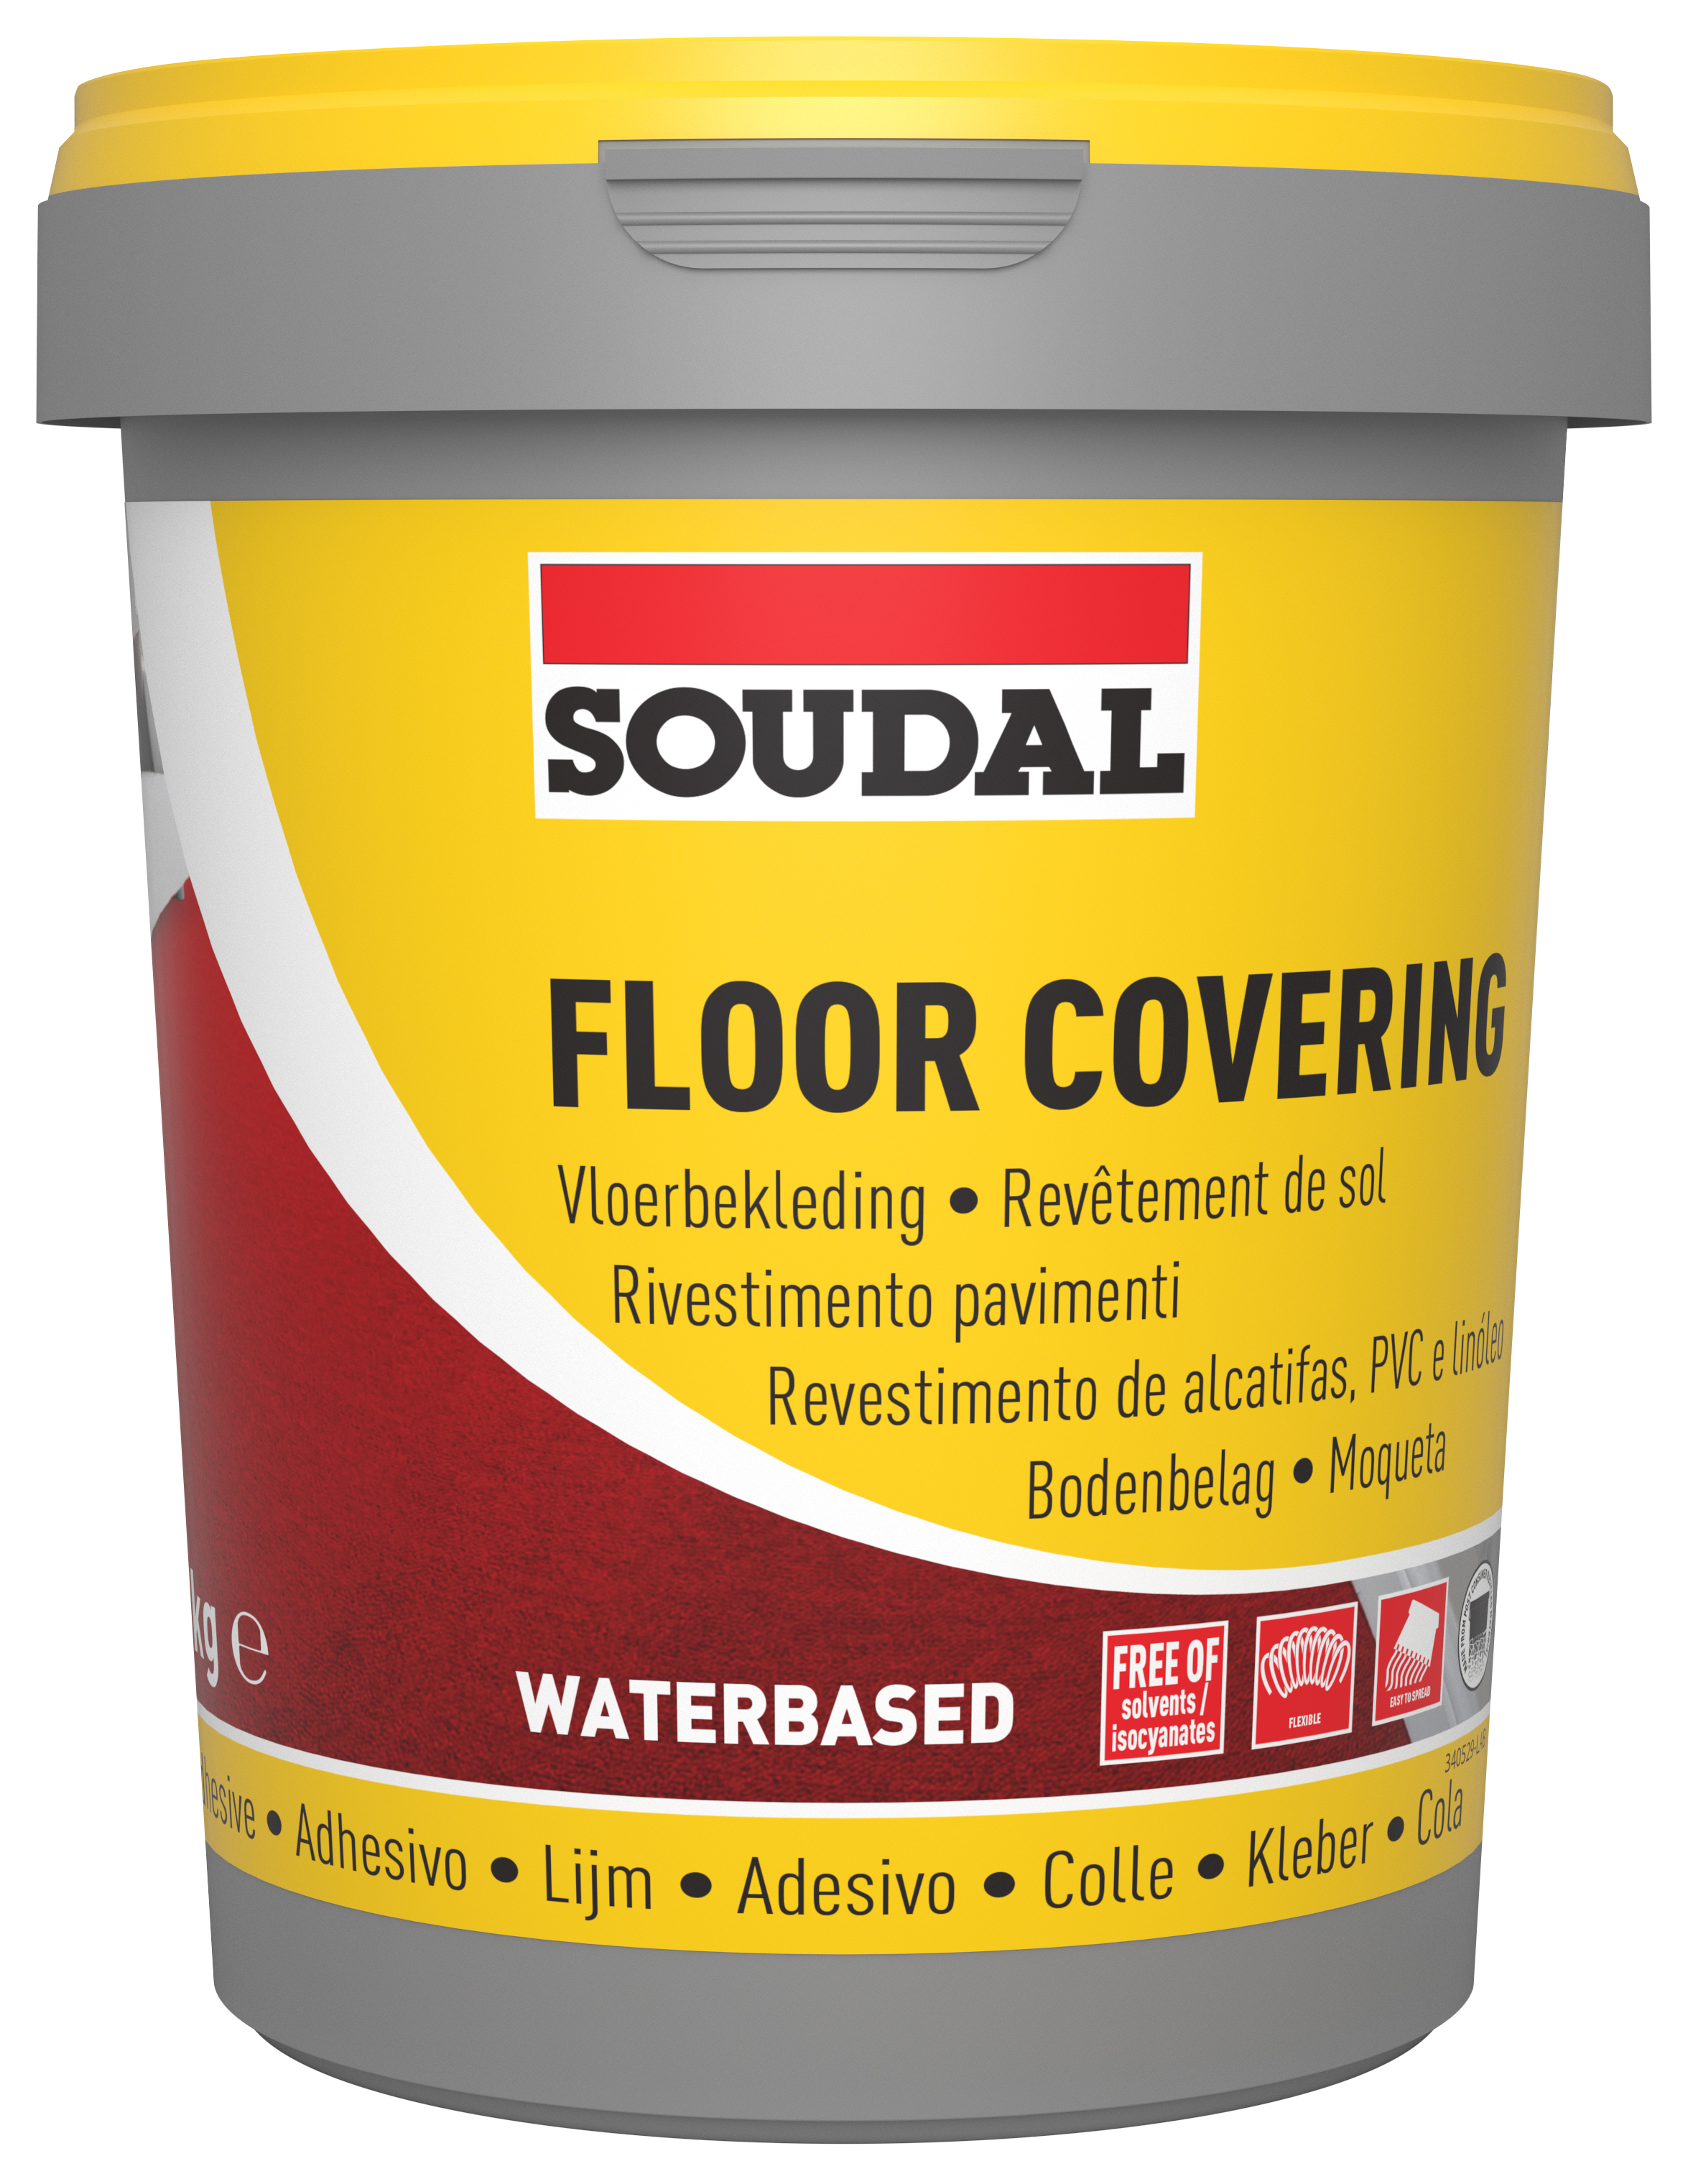 Image of Soudal Floor Covering Adhesive - 1kg